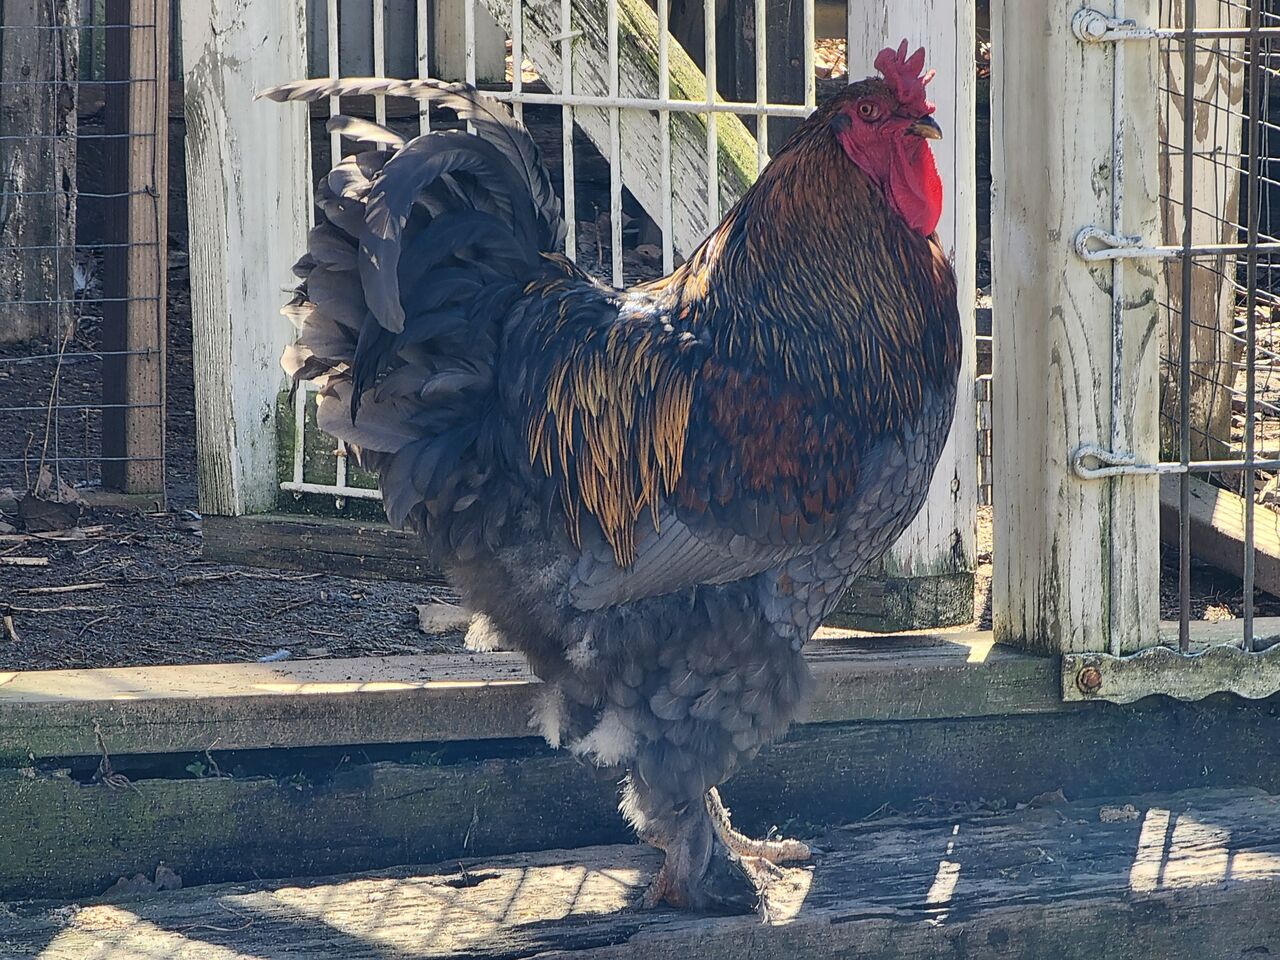 Brahma chicken - The giant King of All Poultry - hen and rooster - Brahma  Hühner 